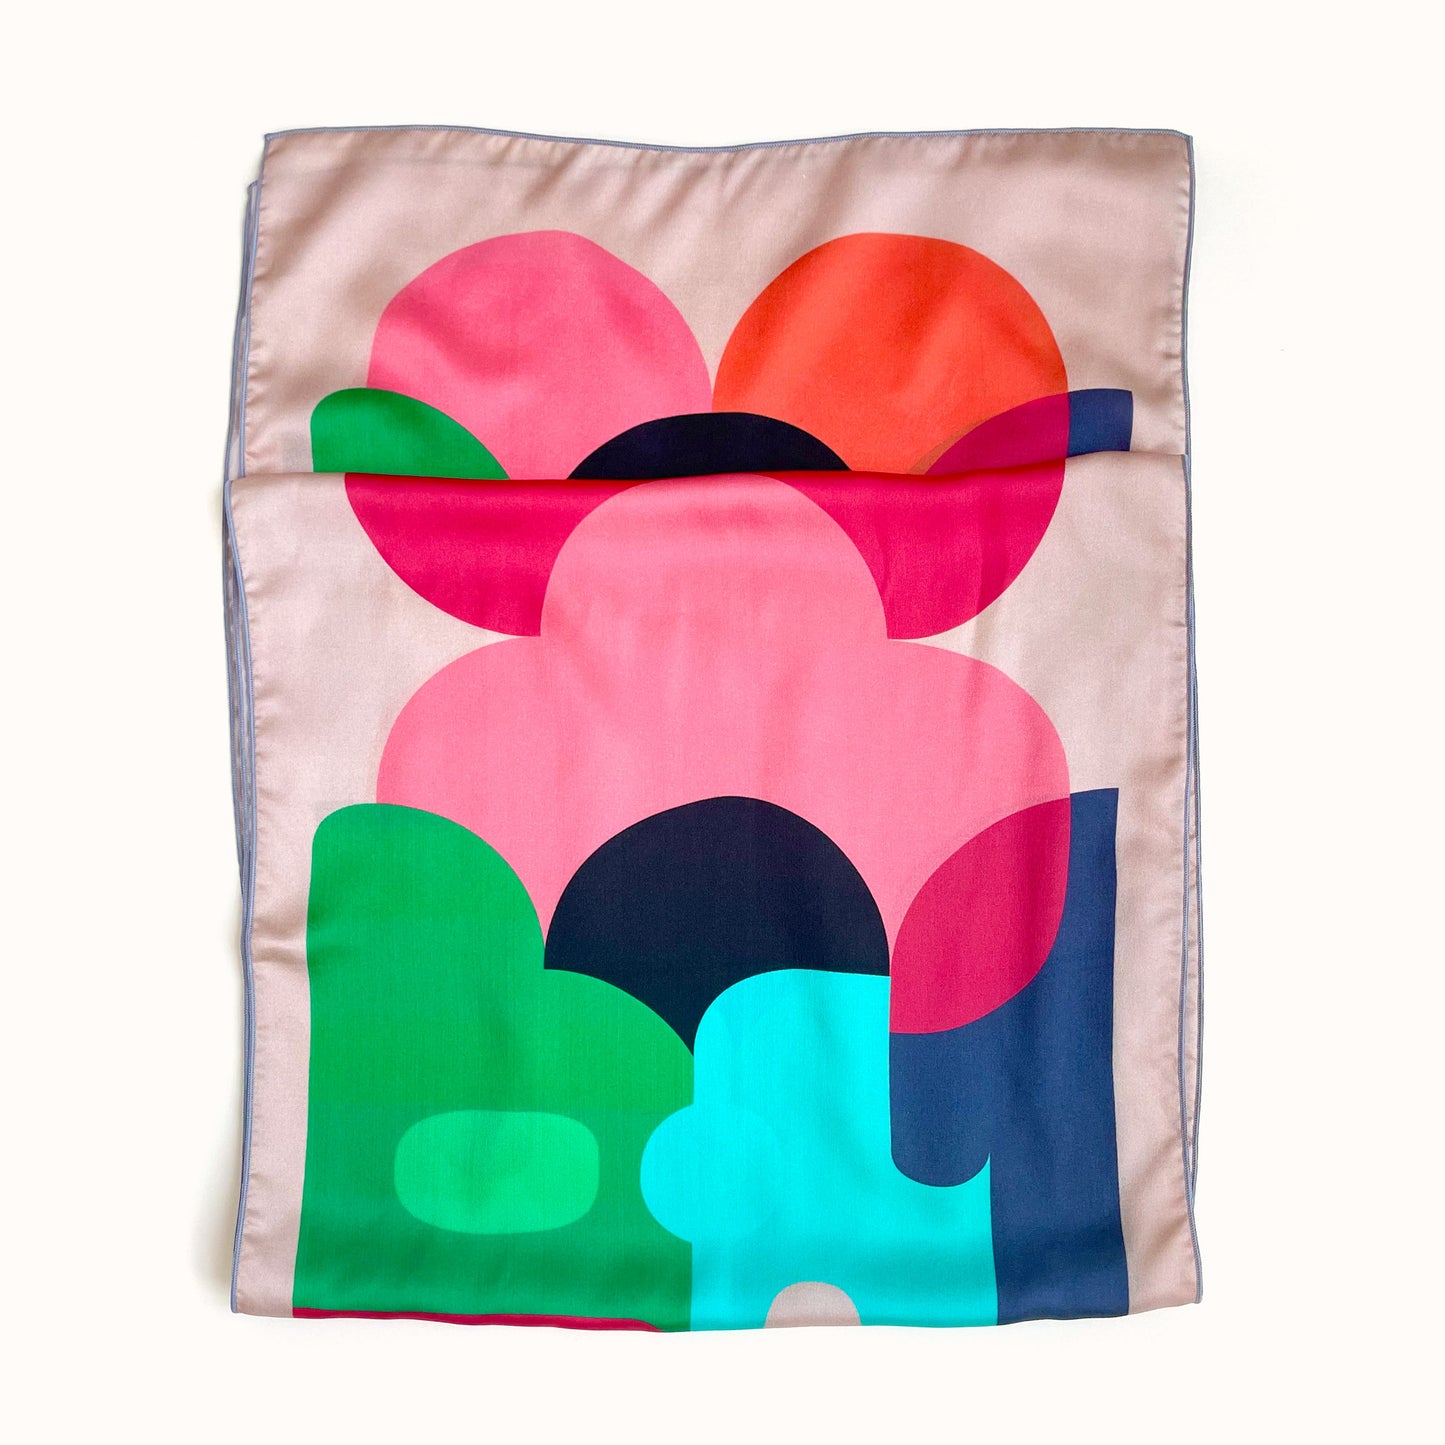 Luxury silk scarf inspired by 1960s style. Bold colors make this a perfect match with any outfit. Wear as a neckerchief or hair wrap to elevate your outfit, try dopamine dressing.